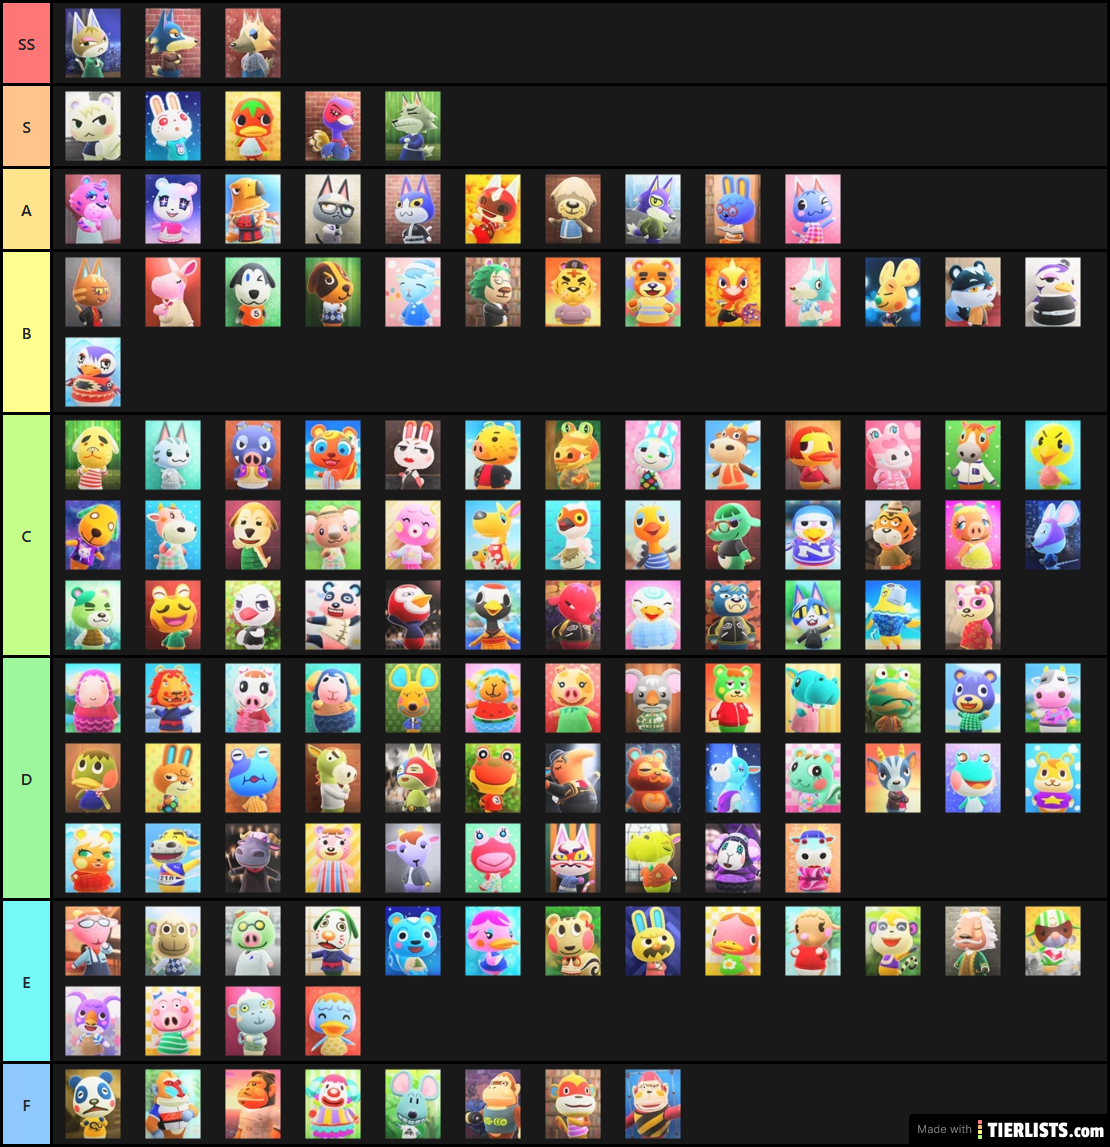 Acnh Character Tier List Popular Villagers The Art of Images